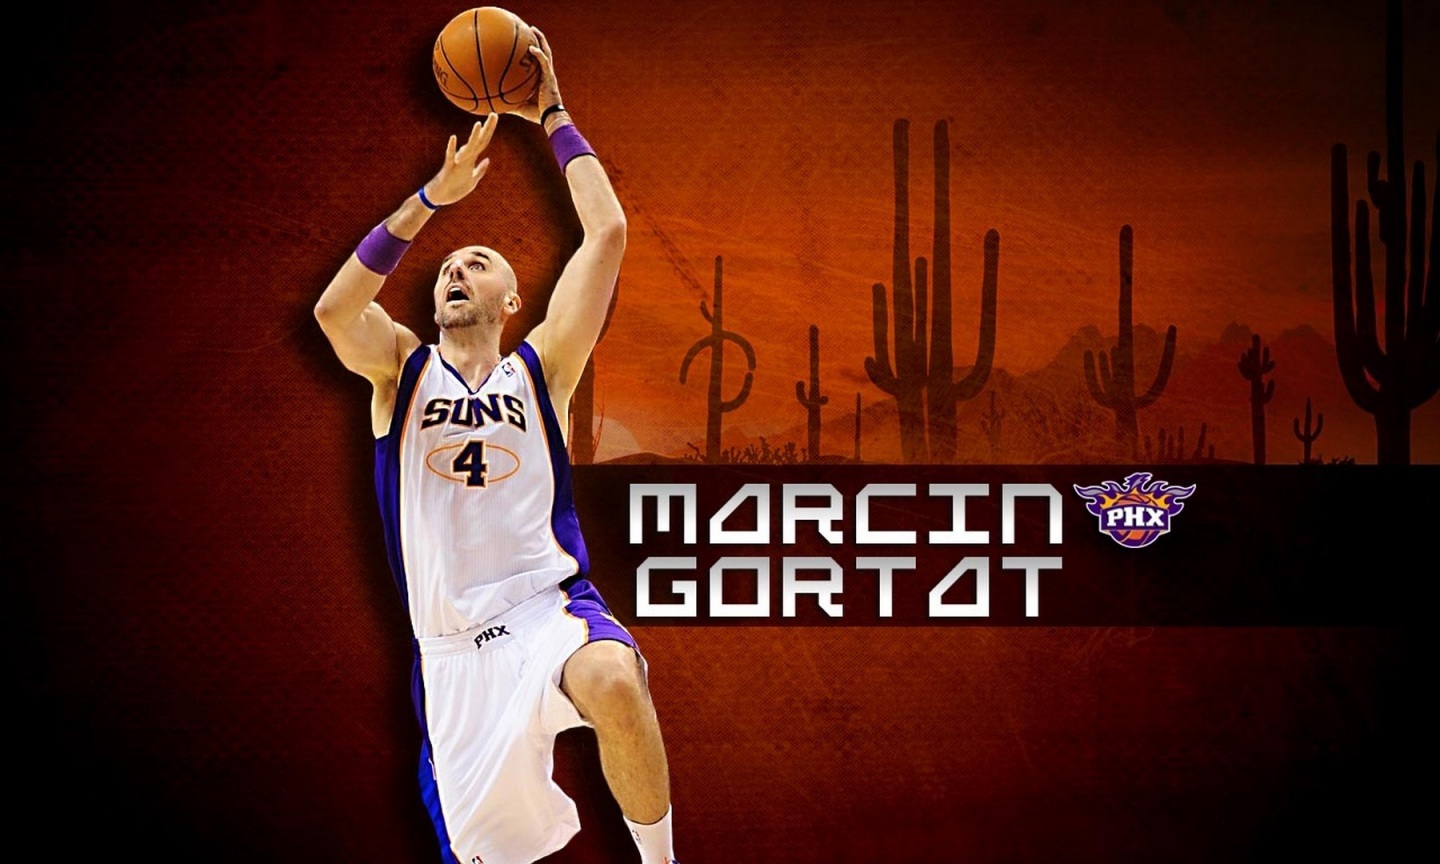 Phoenix Suns Player Marcin Gortat Number Four Lay Up Holding The